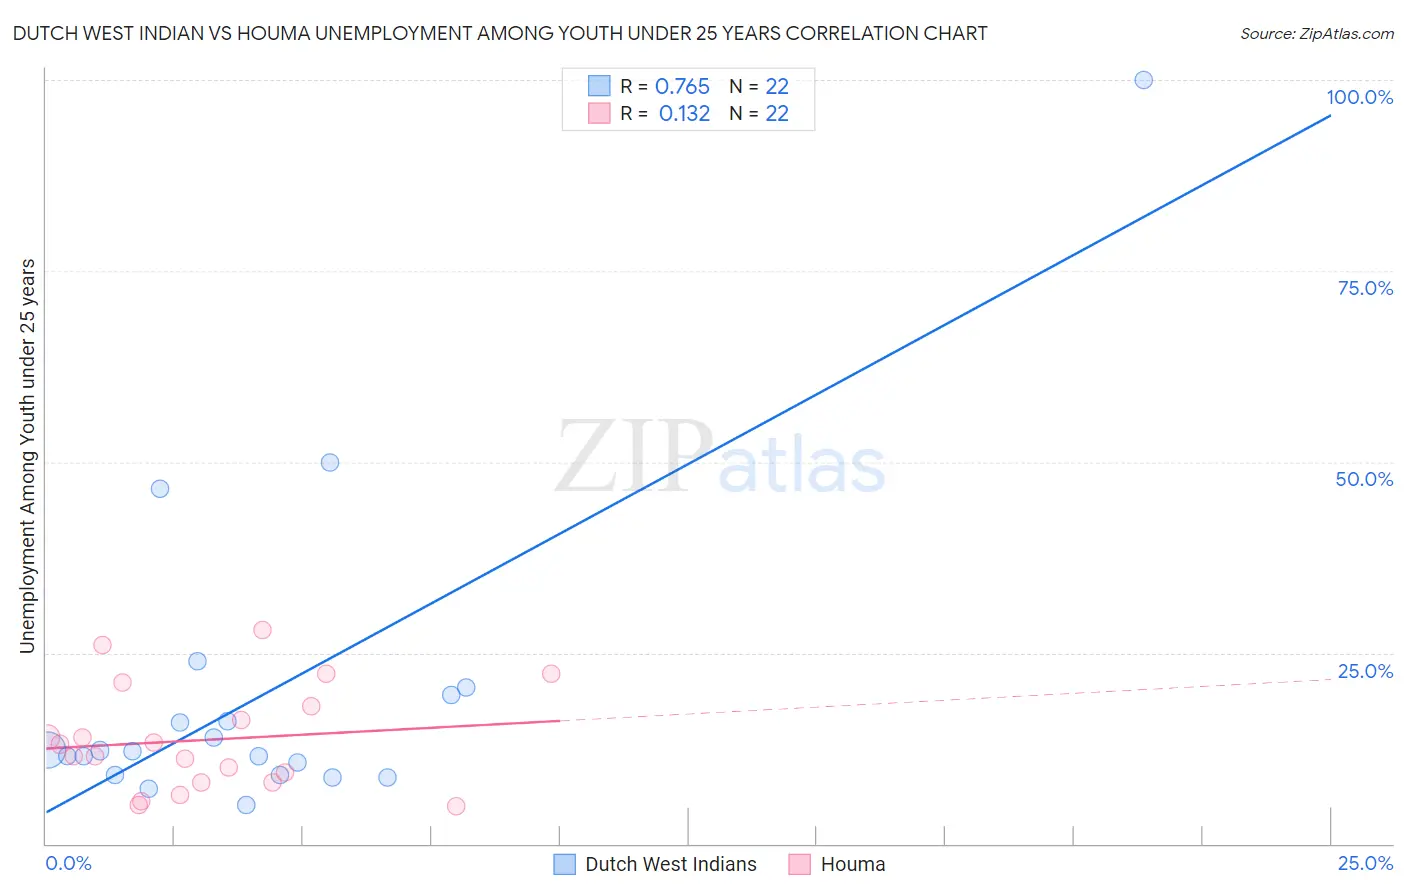 Dutch West Indian vs Houma Unemployment Among Youth under 25 years